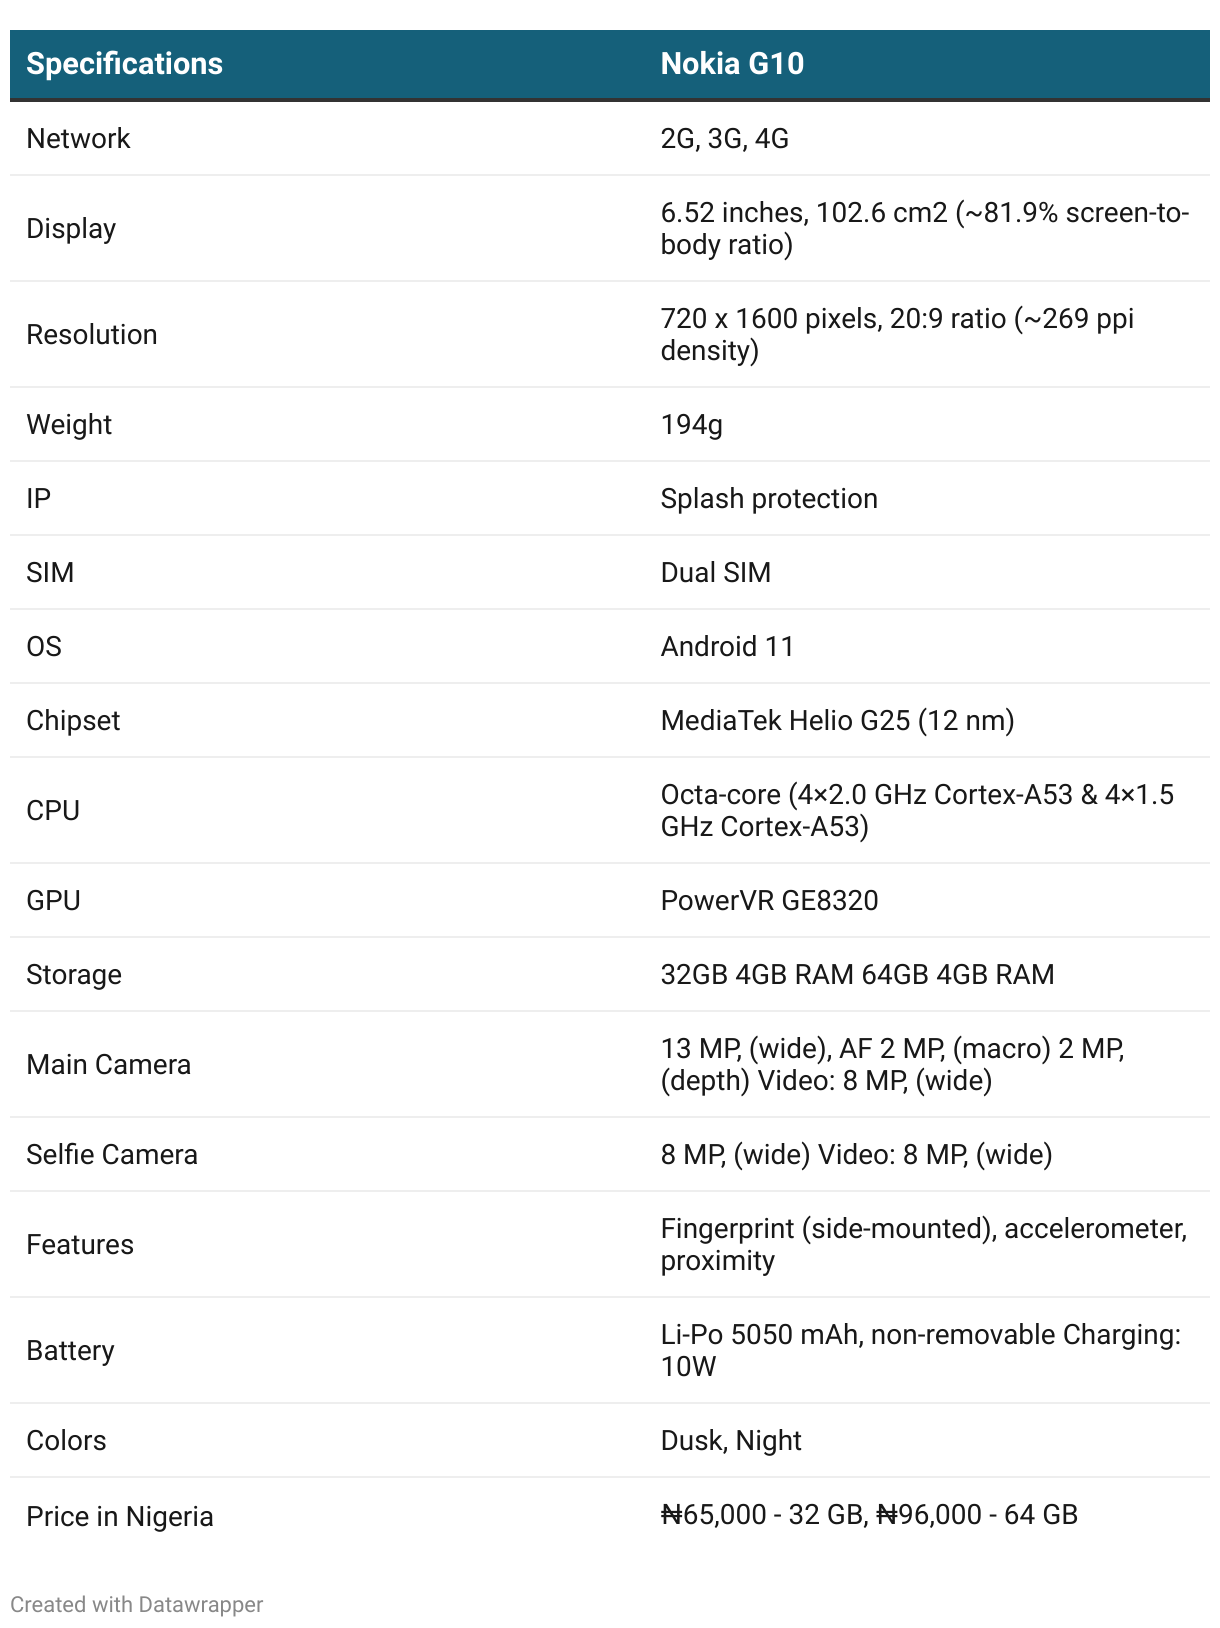 Table Specifications for the Nokia G10 phone